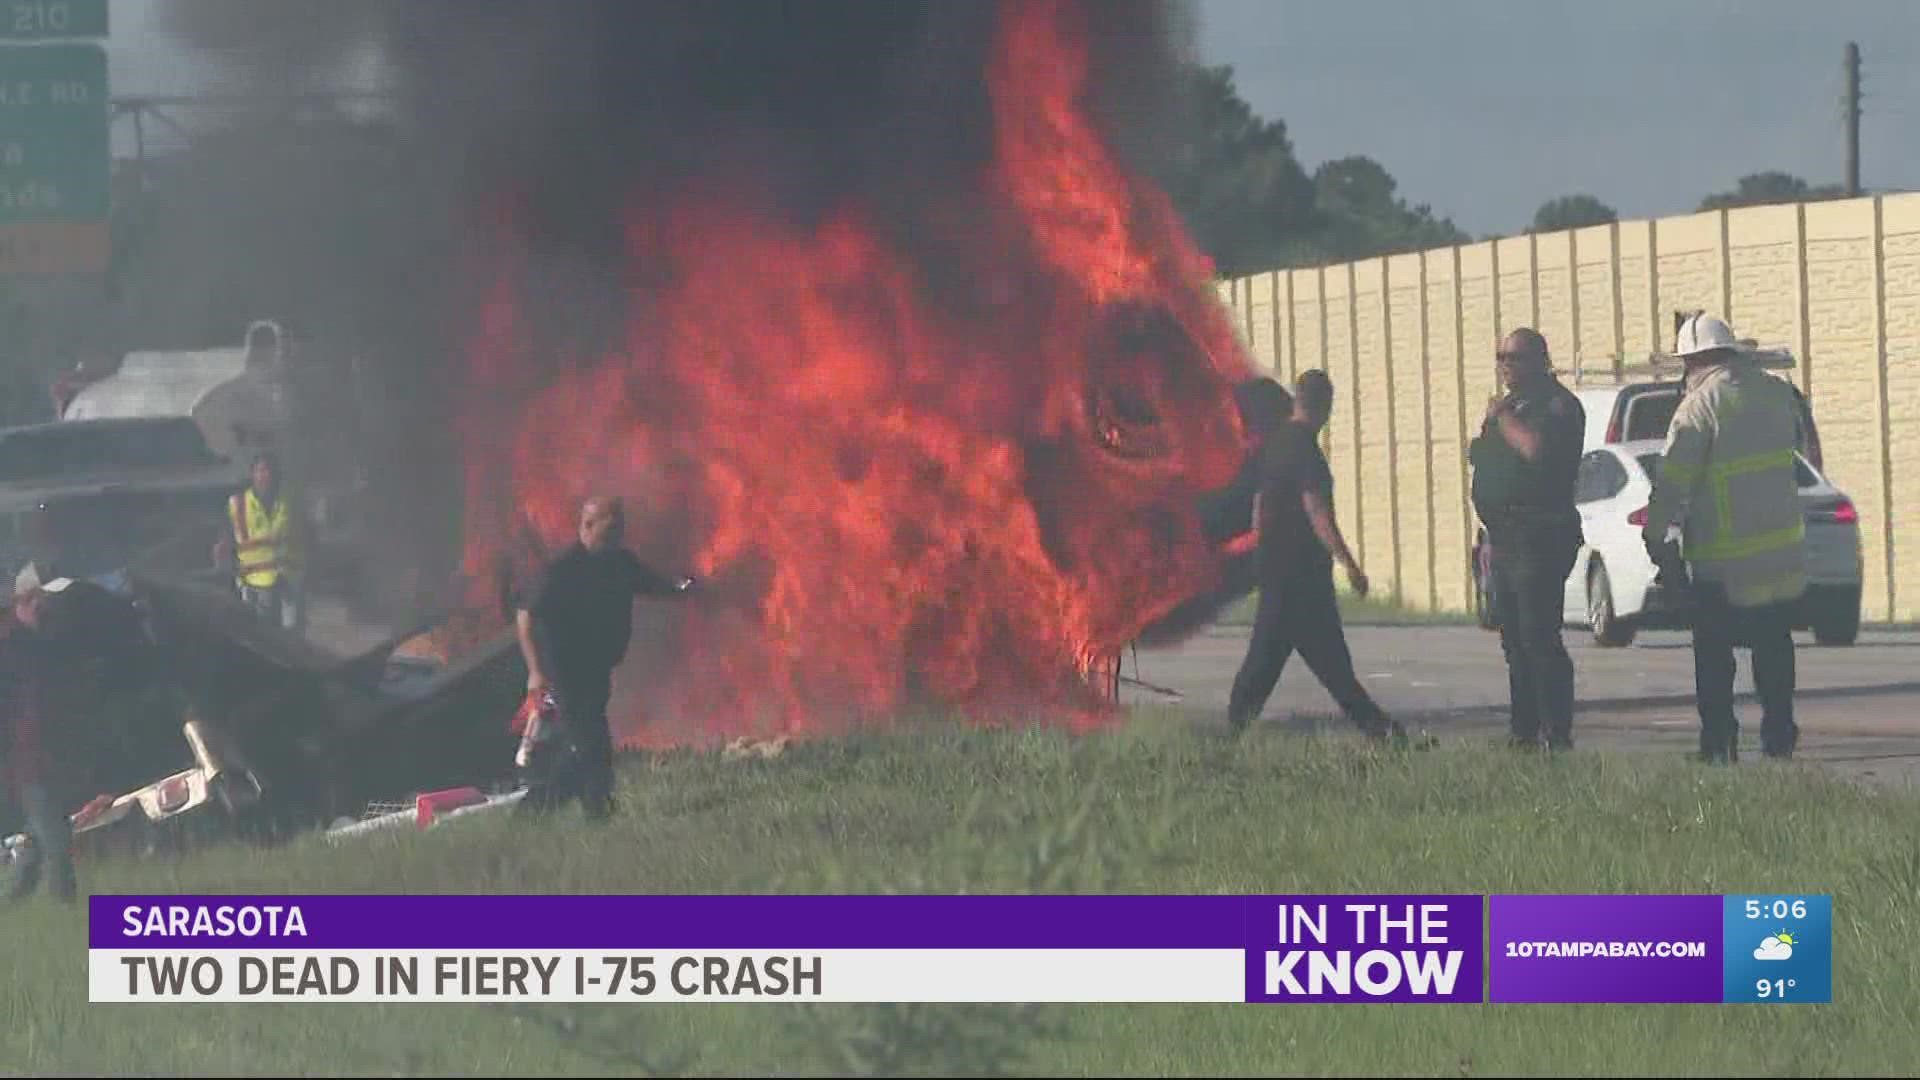 The food truck they were traveling in lost a tire, causing it to overturn and catch on fire.